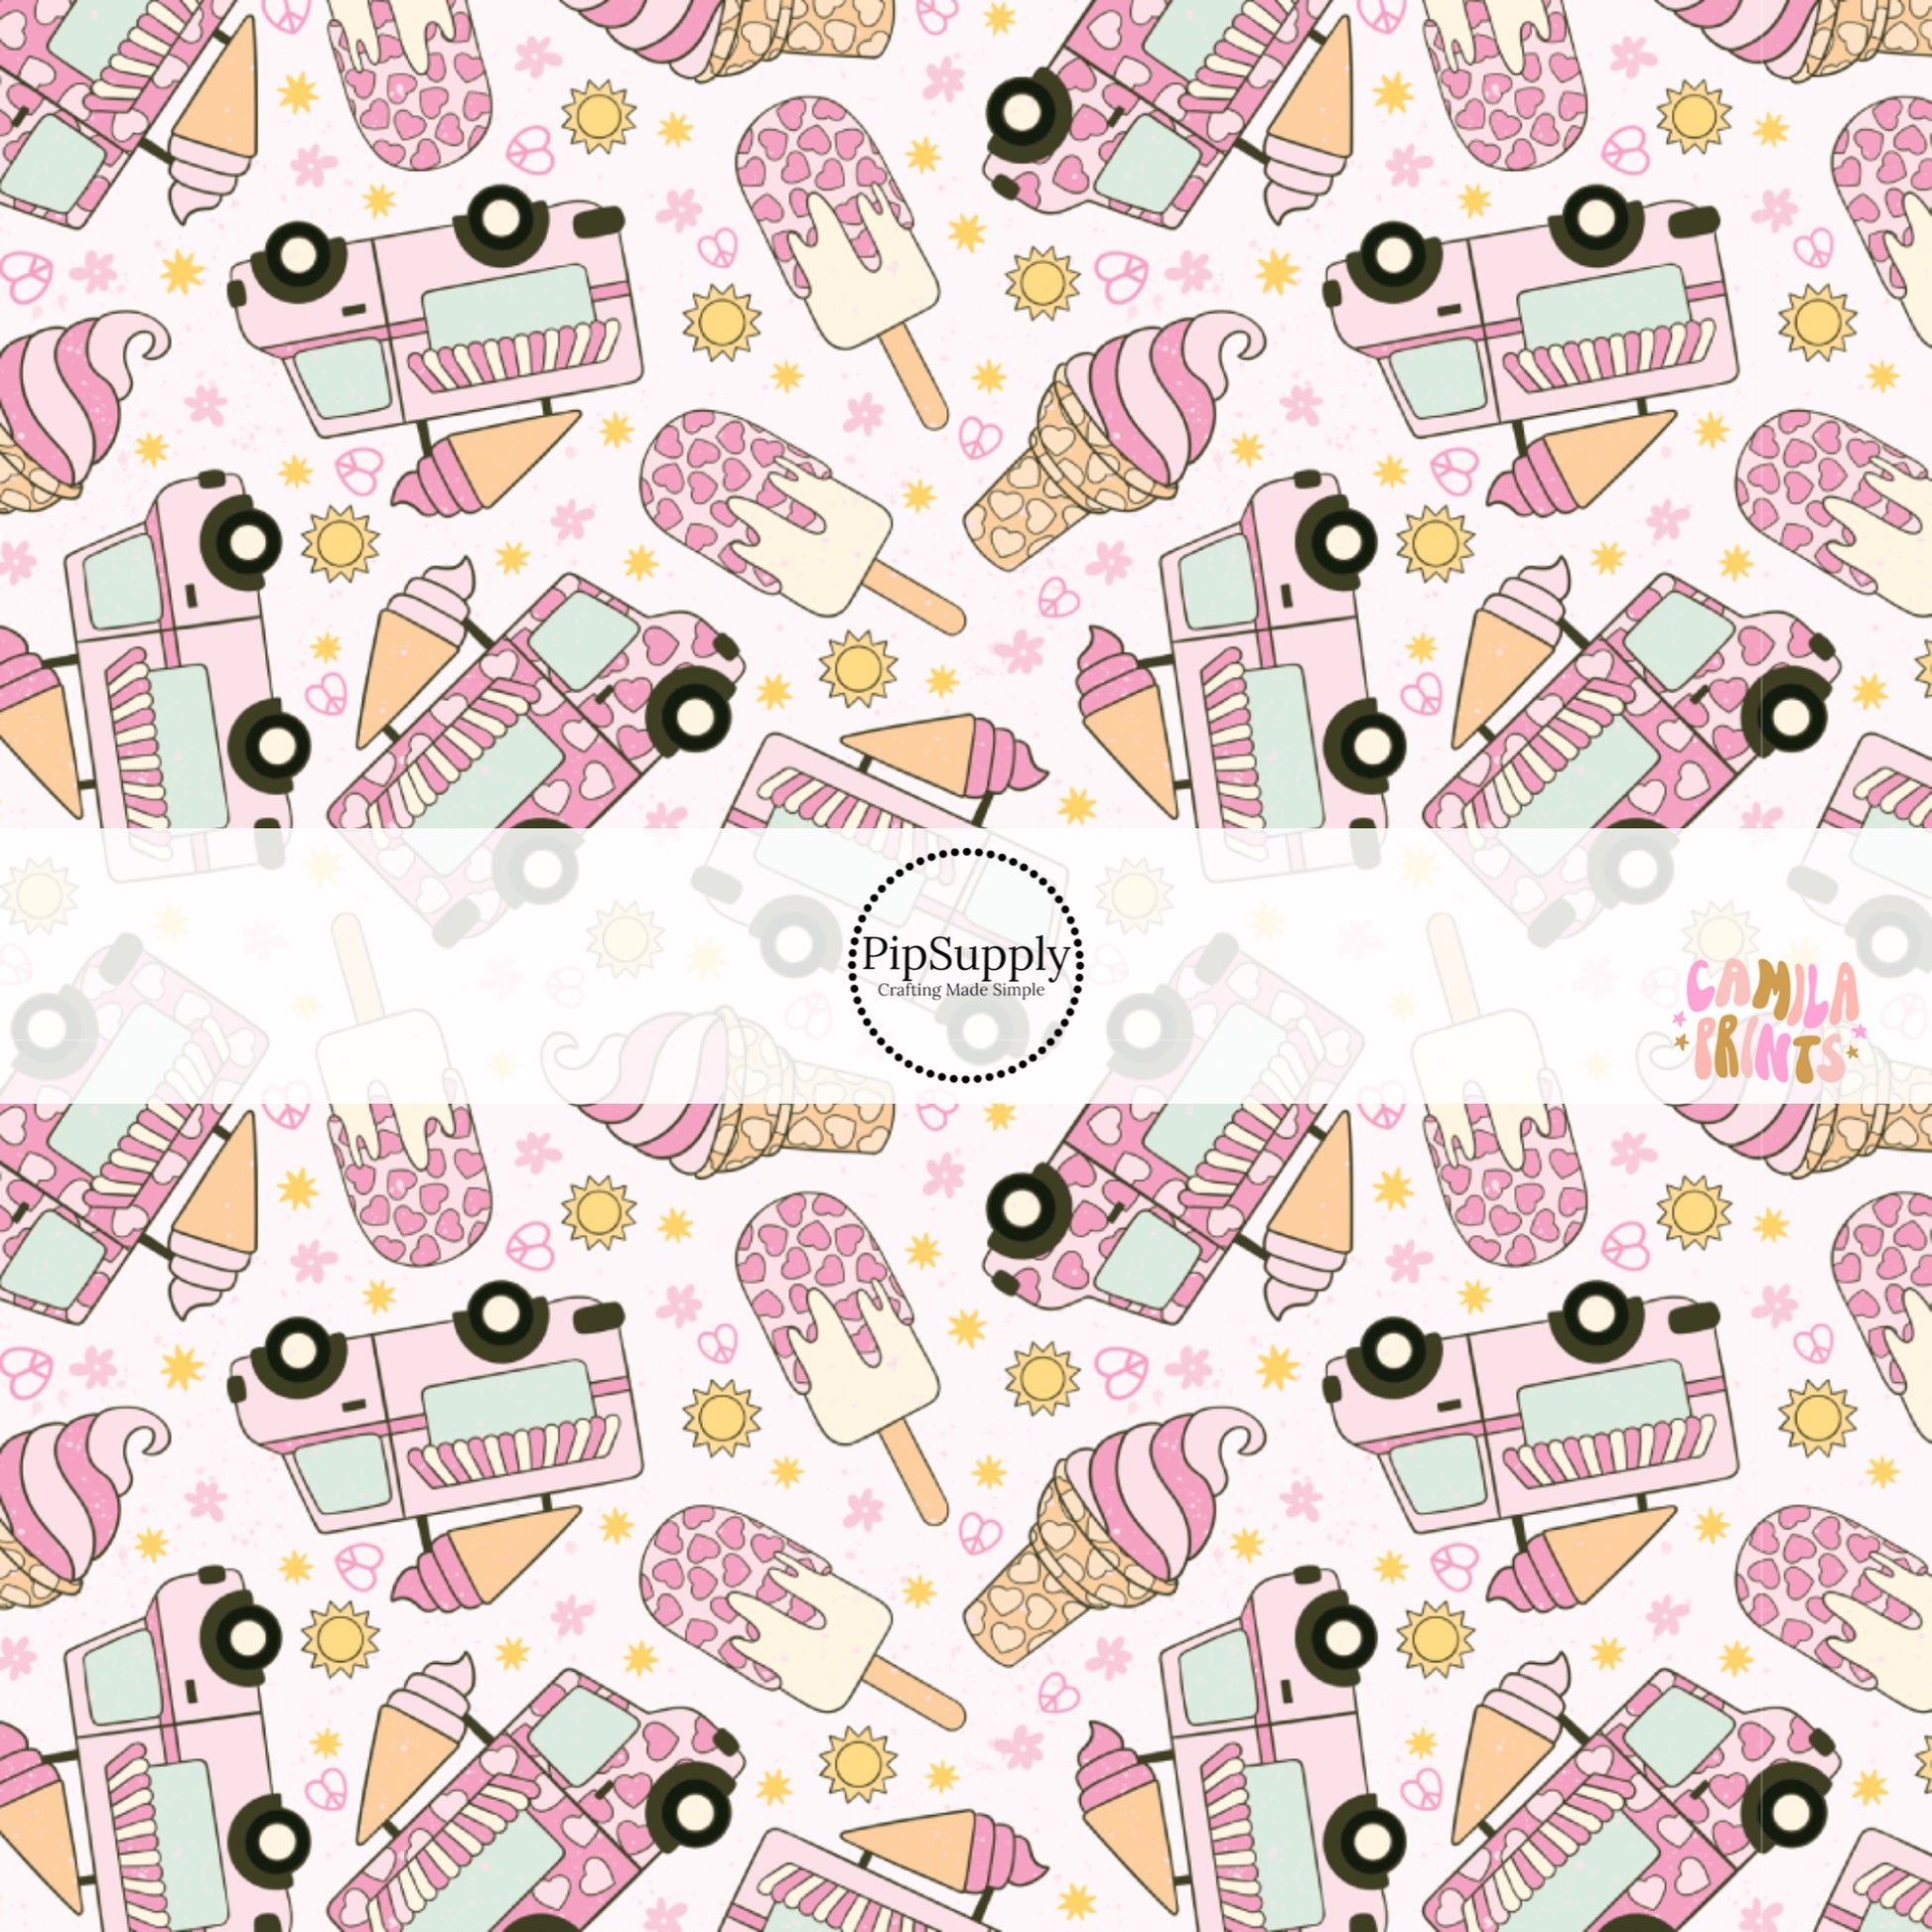 Pink ice cream trucks, ice cream cones, and popsicles on light pink fabric by the yard.